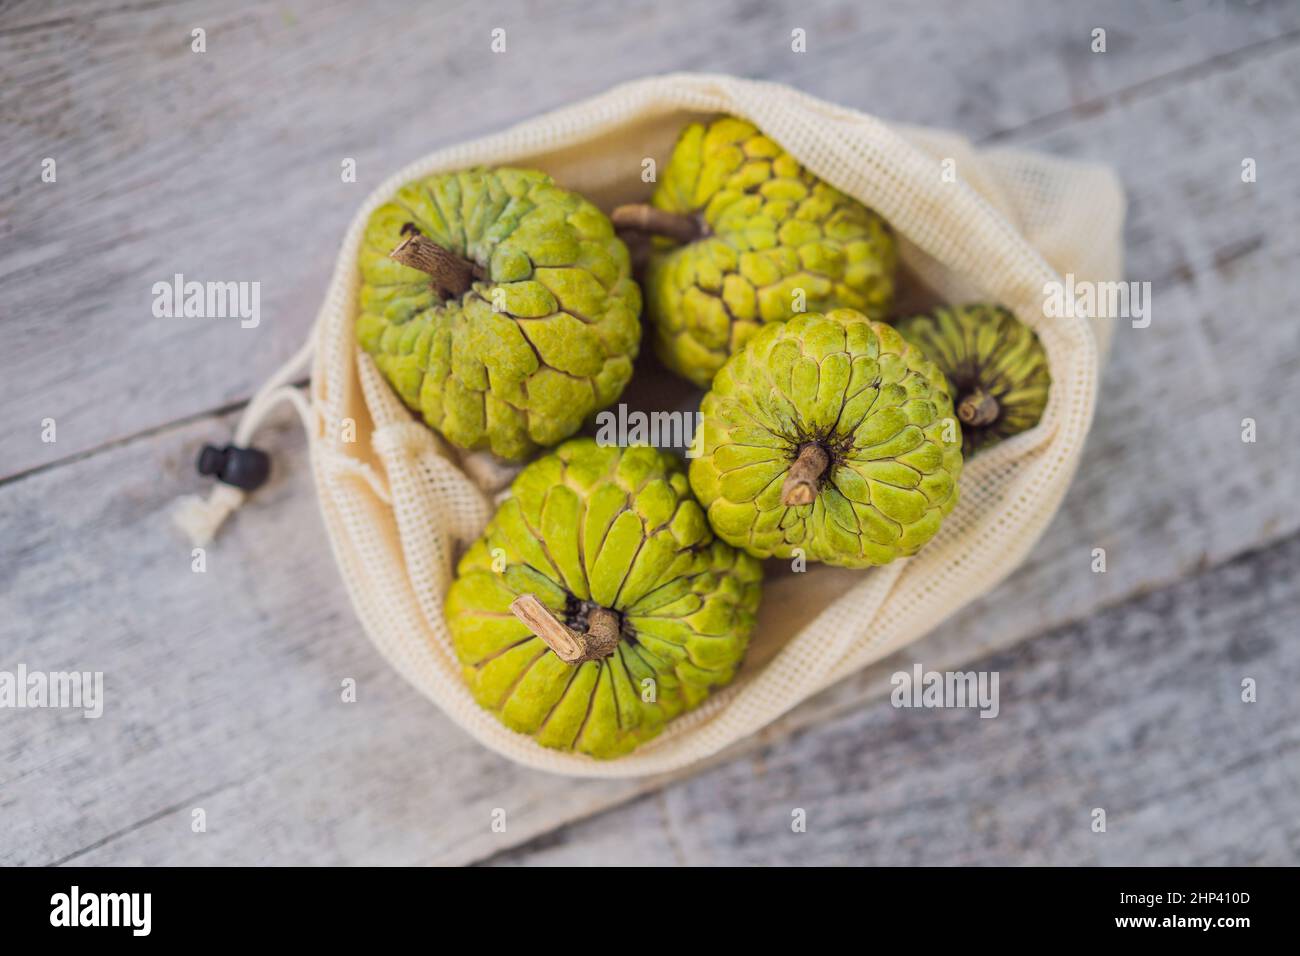 Cherimoya in a reusable bag on a stylish wooden kitchen surface. Zero waste concept, plastic free concept. Healthy clean eating diet and detox. Summer Stock Photo